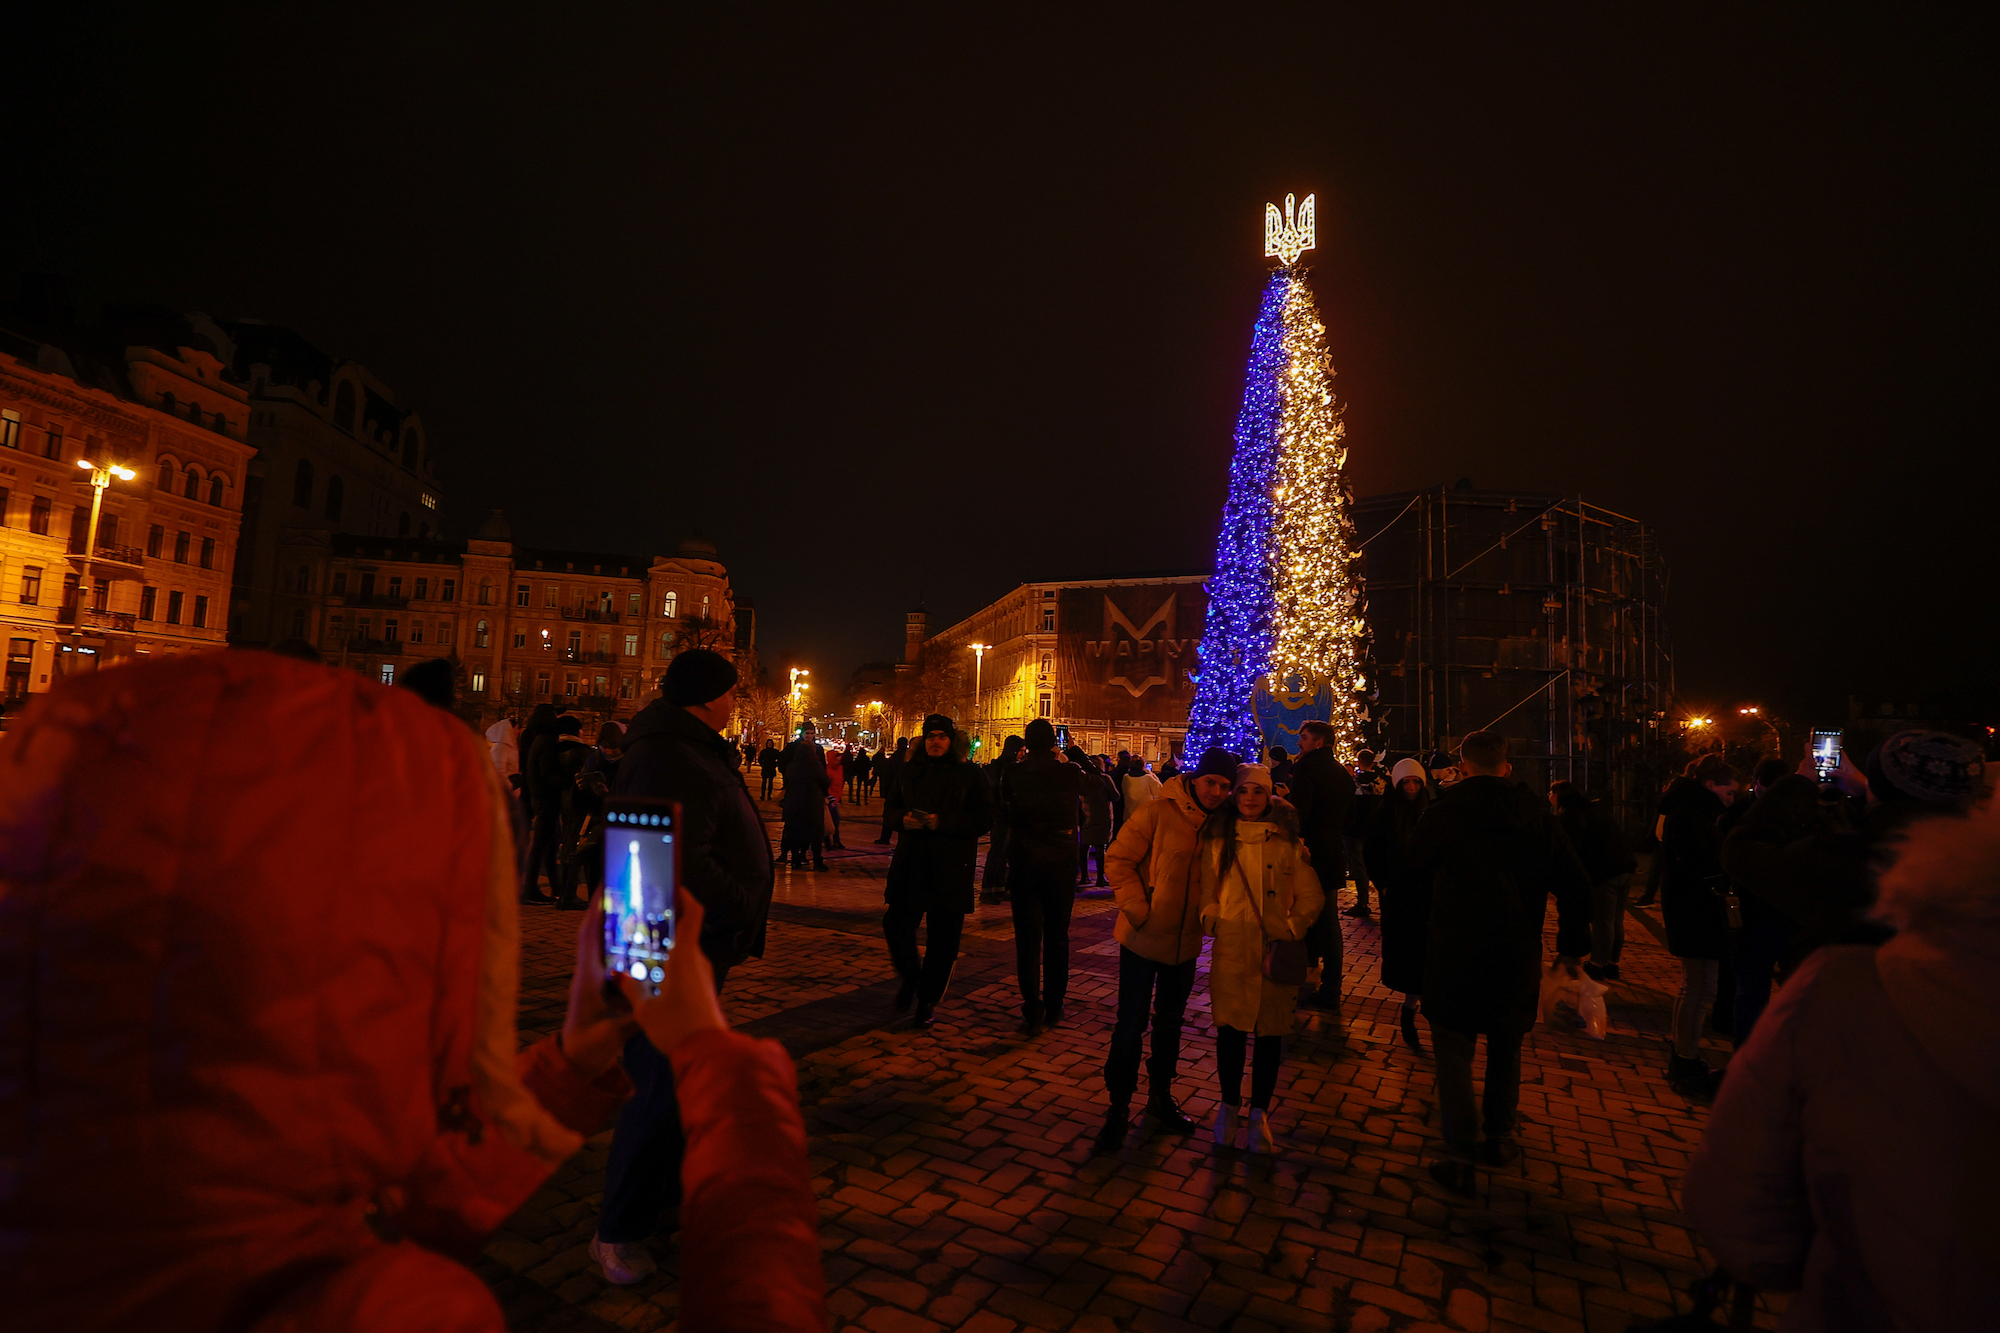 People take pictures in front of the recently lit Christmas tree on Kyiv's Sophia Square on Sunday.